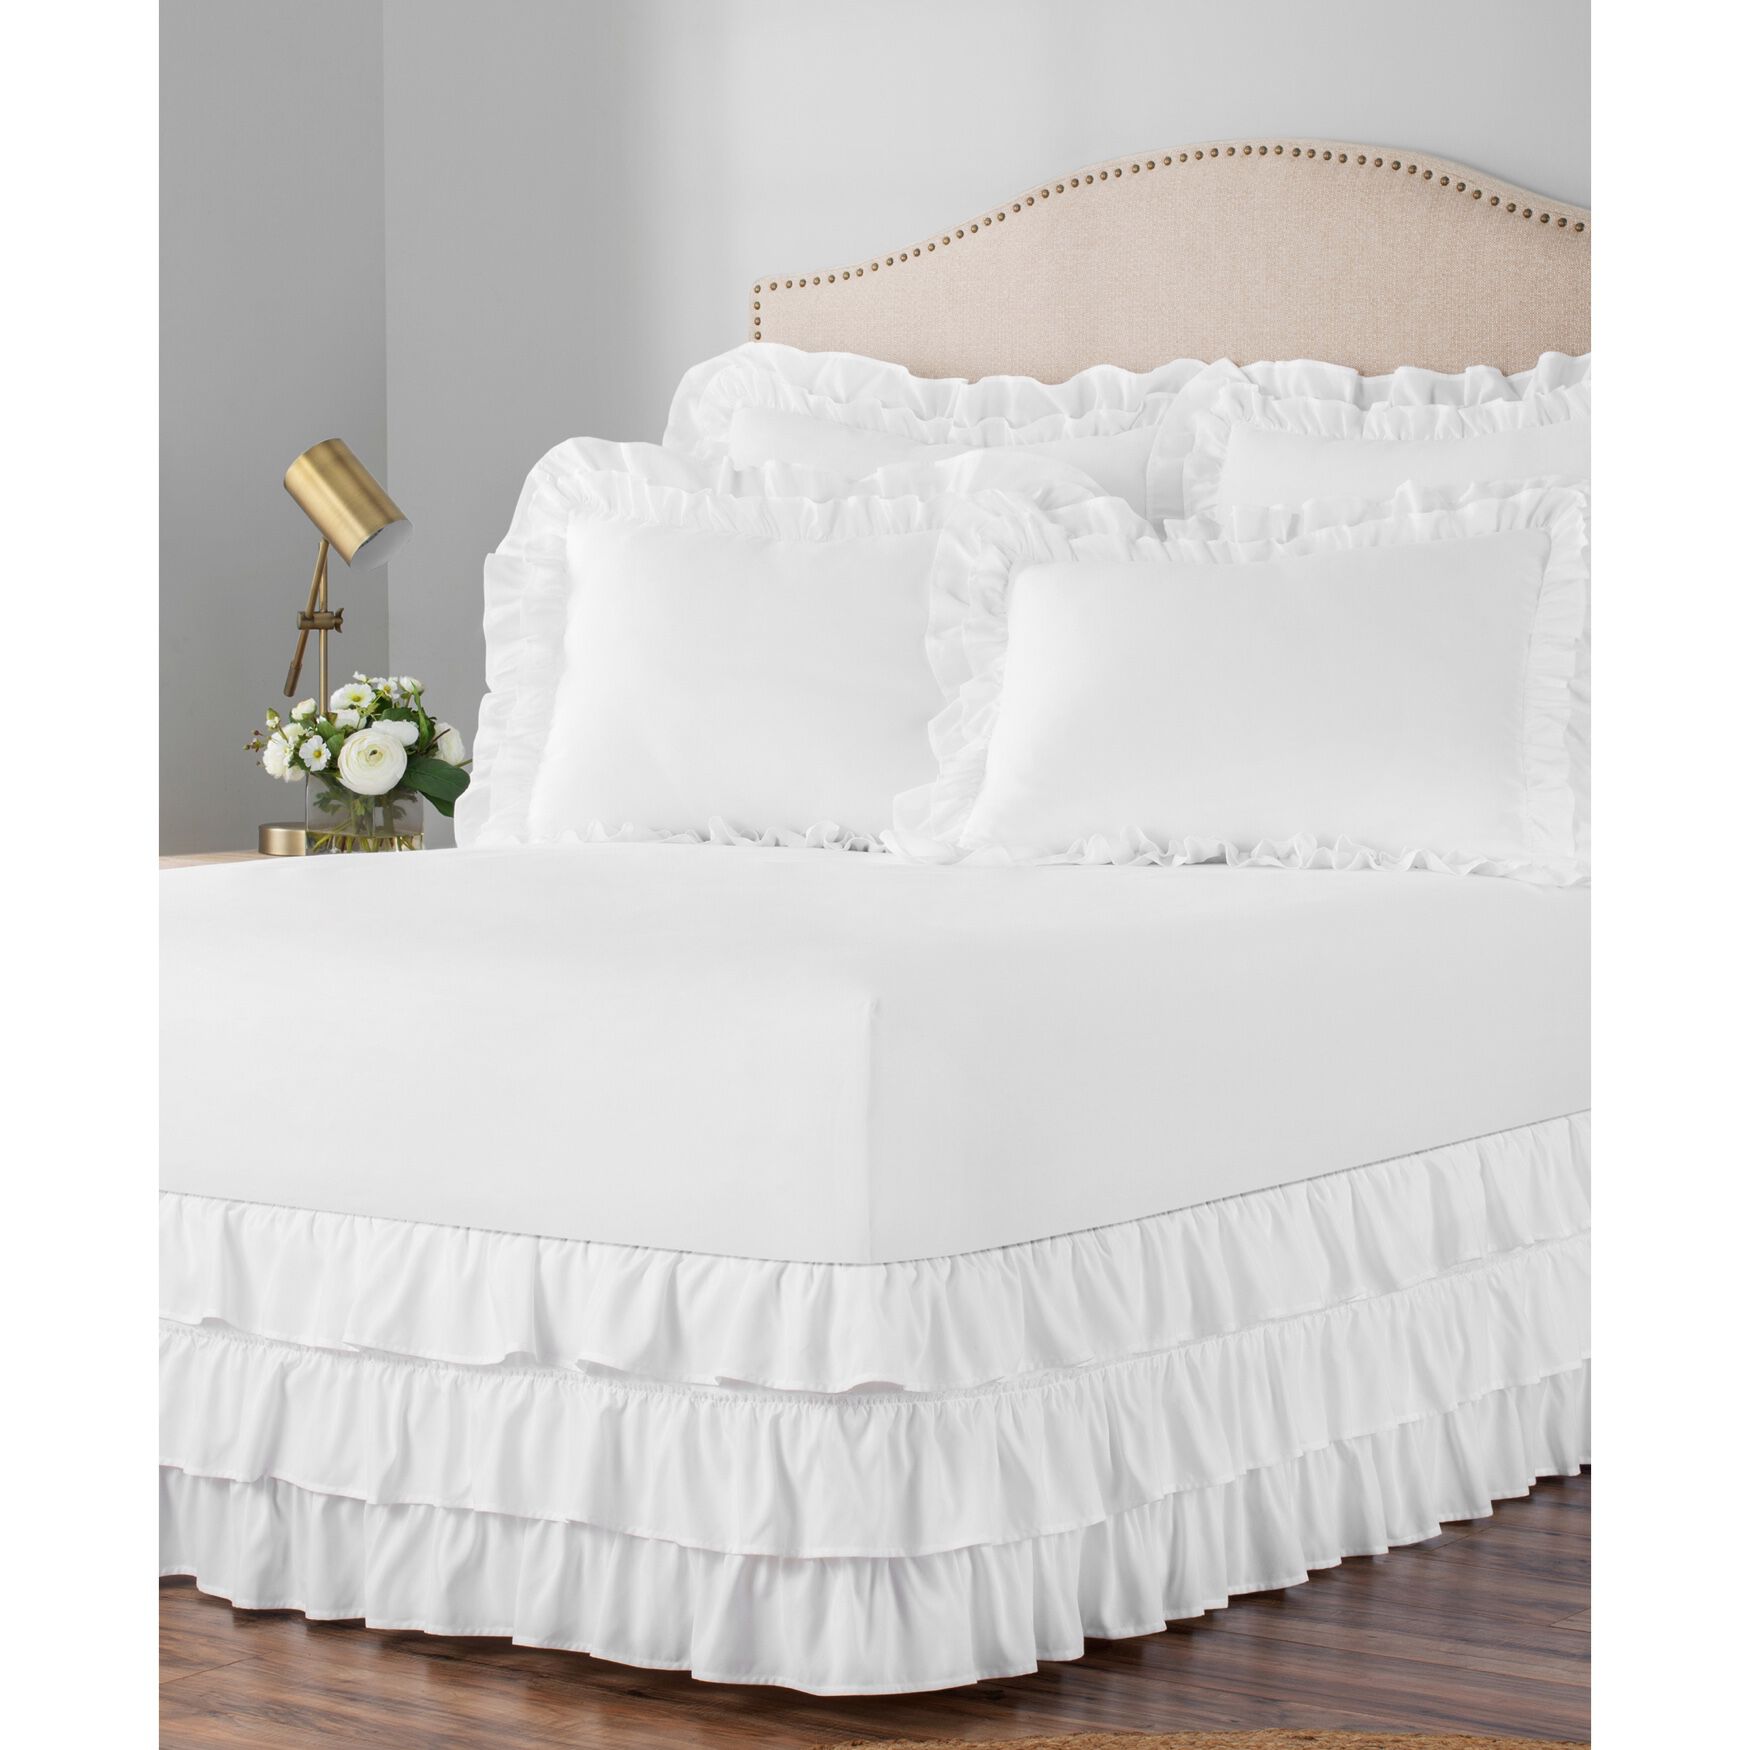 Belles & Whistles 3-Tiered Ruffle 15